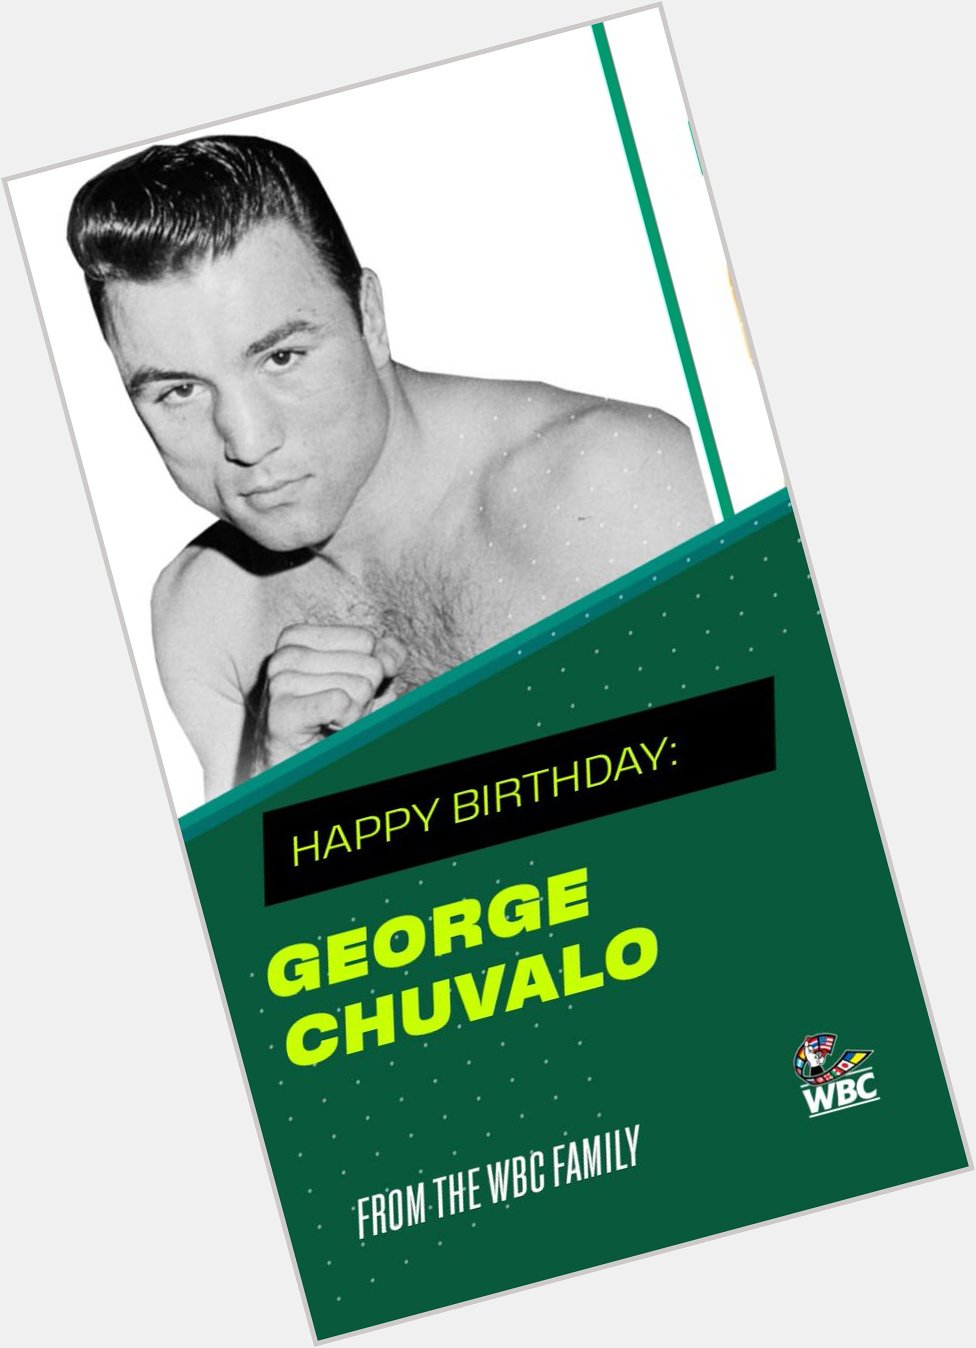 Happy birthday to legendary boxer and sensational person George Chuvalo 